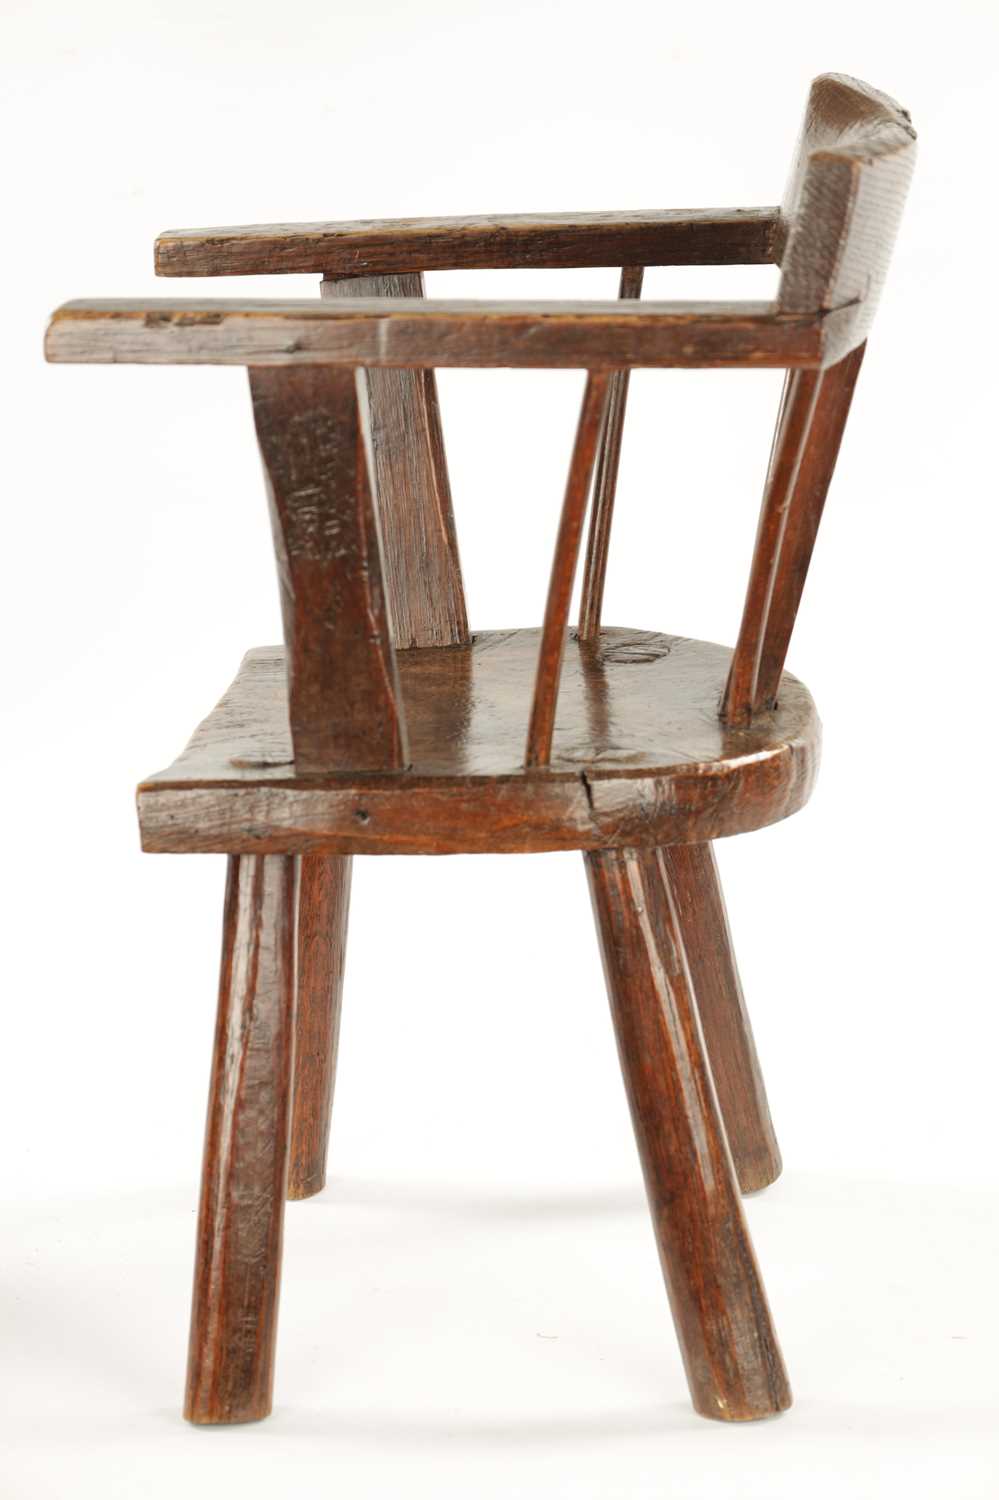 A RARE 18TH CENTURY PRIMITIVE ASH AND ELM CHILD’S CHAIR - Image 5 of 7